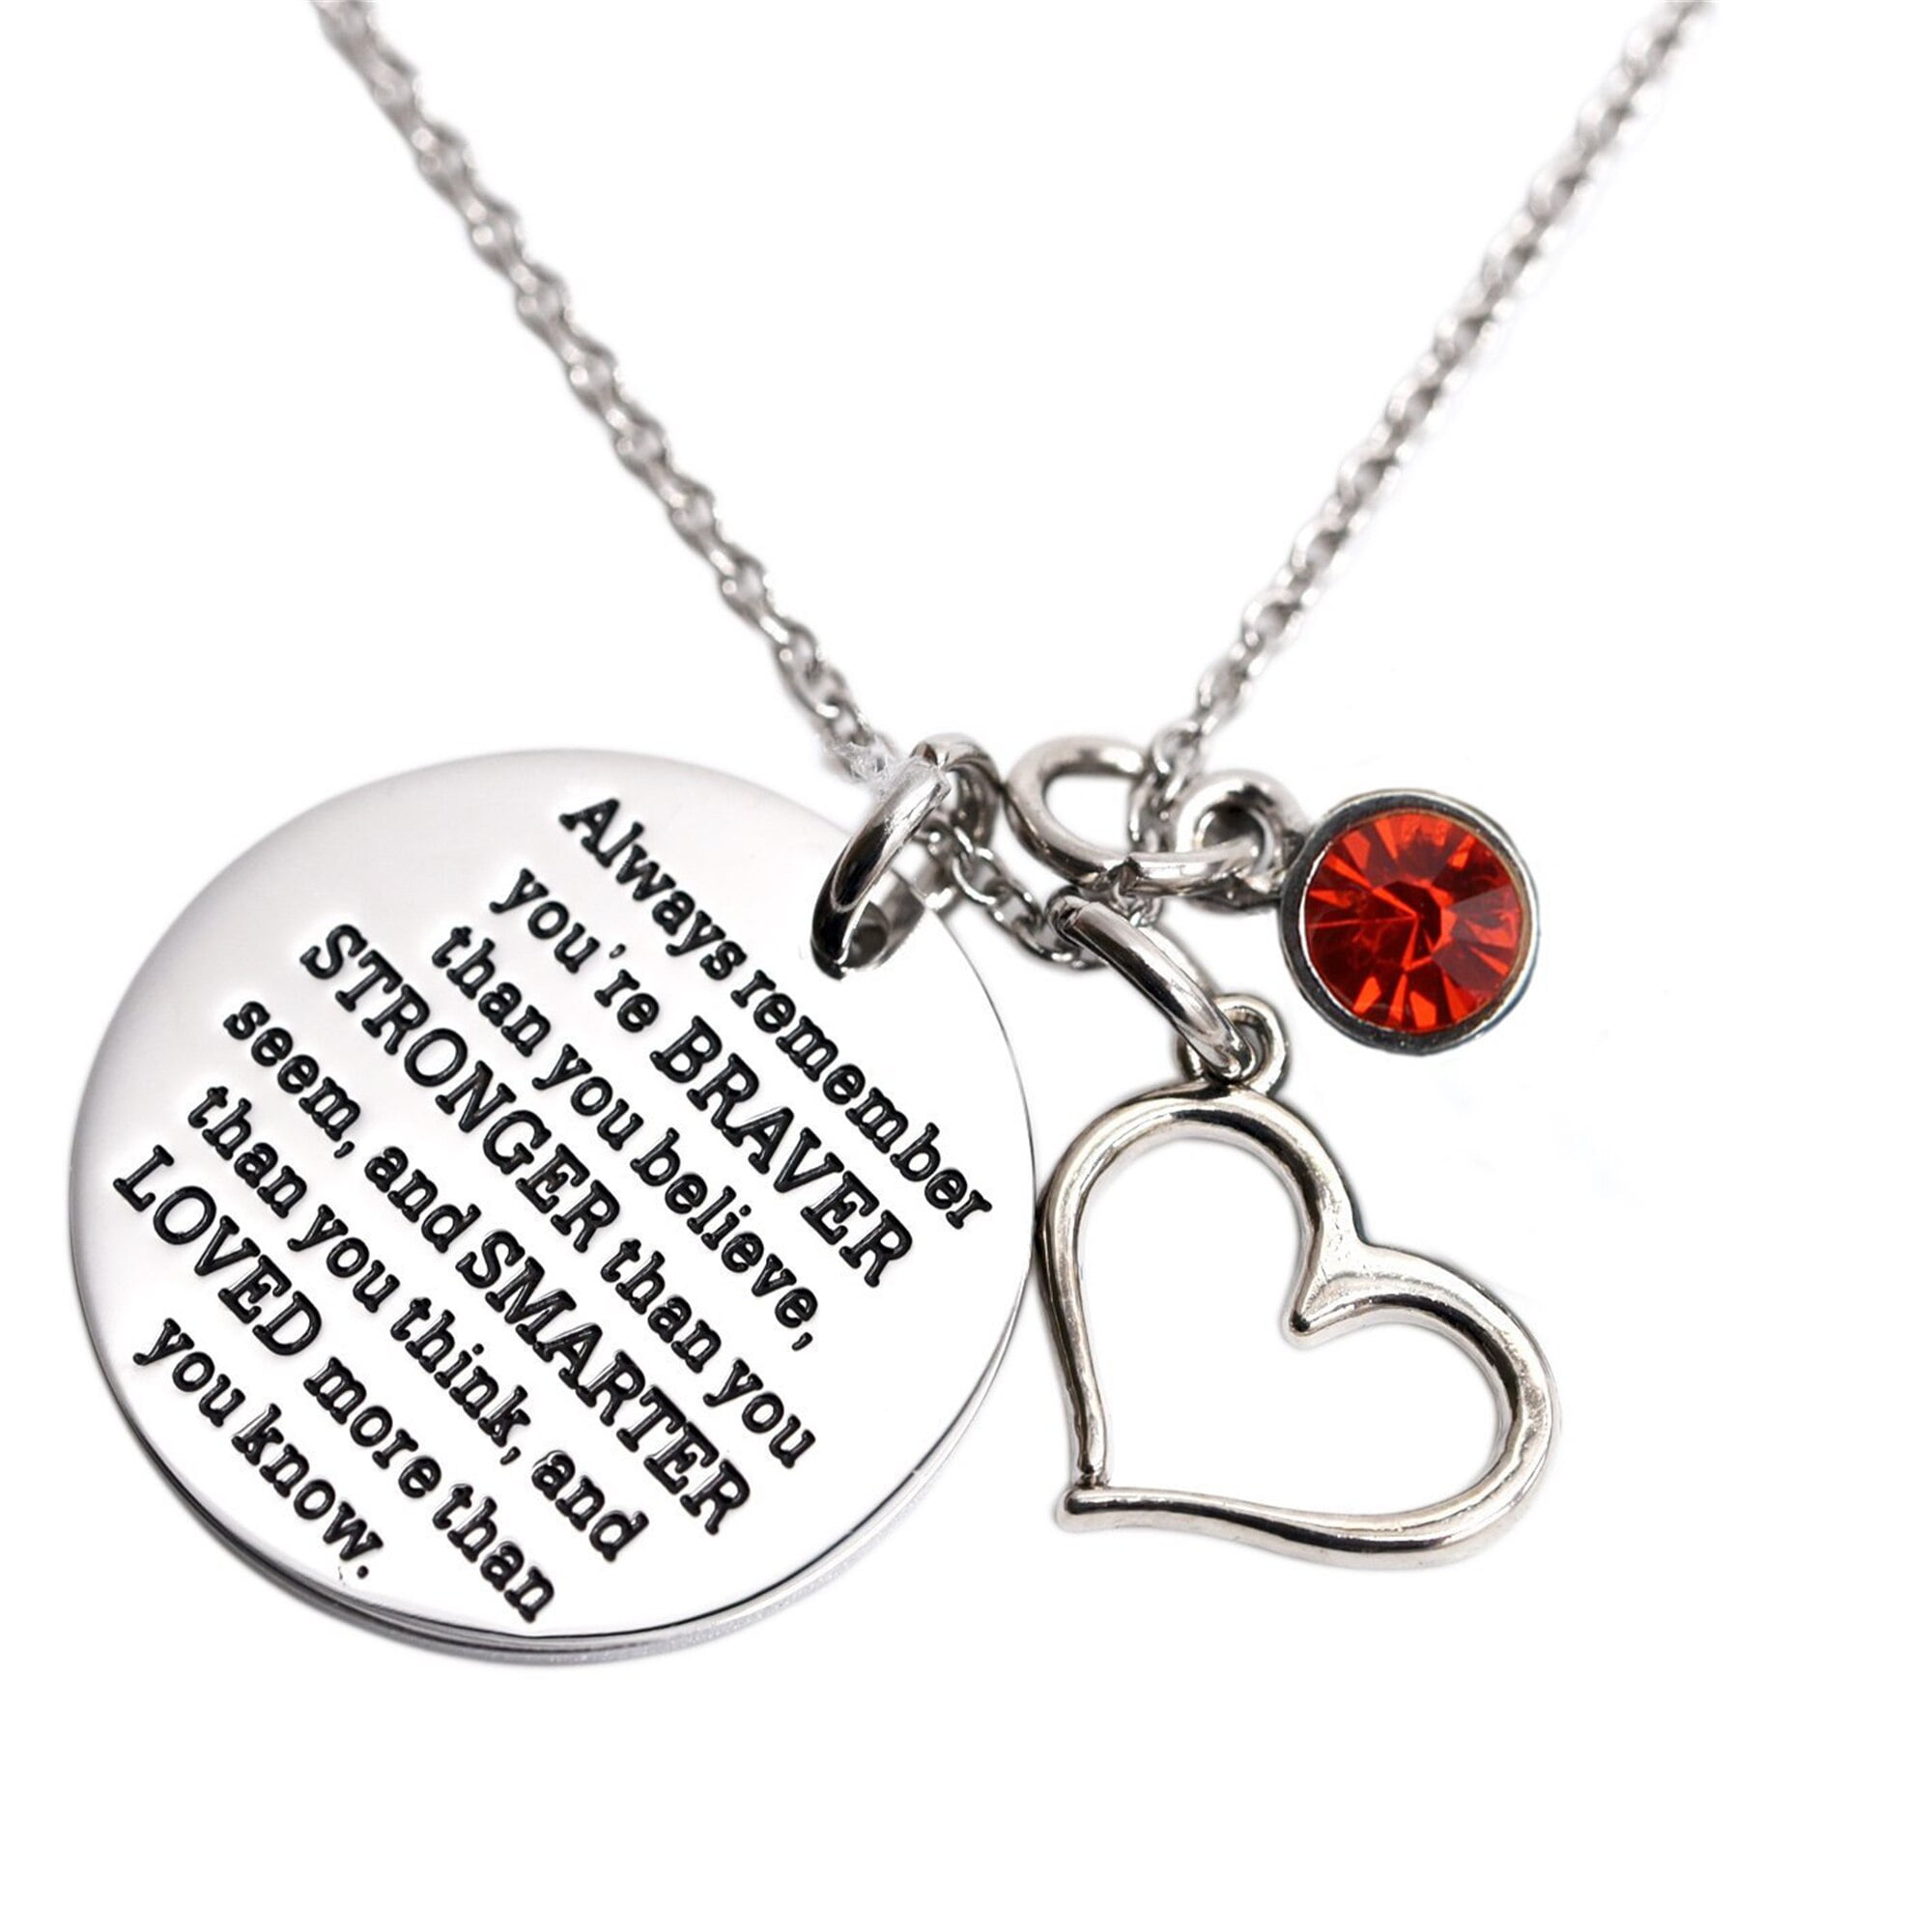 Wife Valentine Gift Birthday Gift Necklace Name Braver Than Believe Love Husband Loved Than Know Stronger Than Seem to My Keila Always Remember That I Love You Smarter Than Think